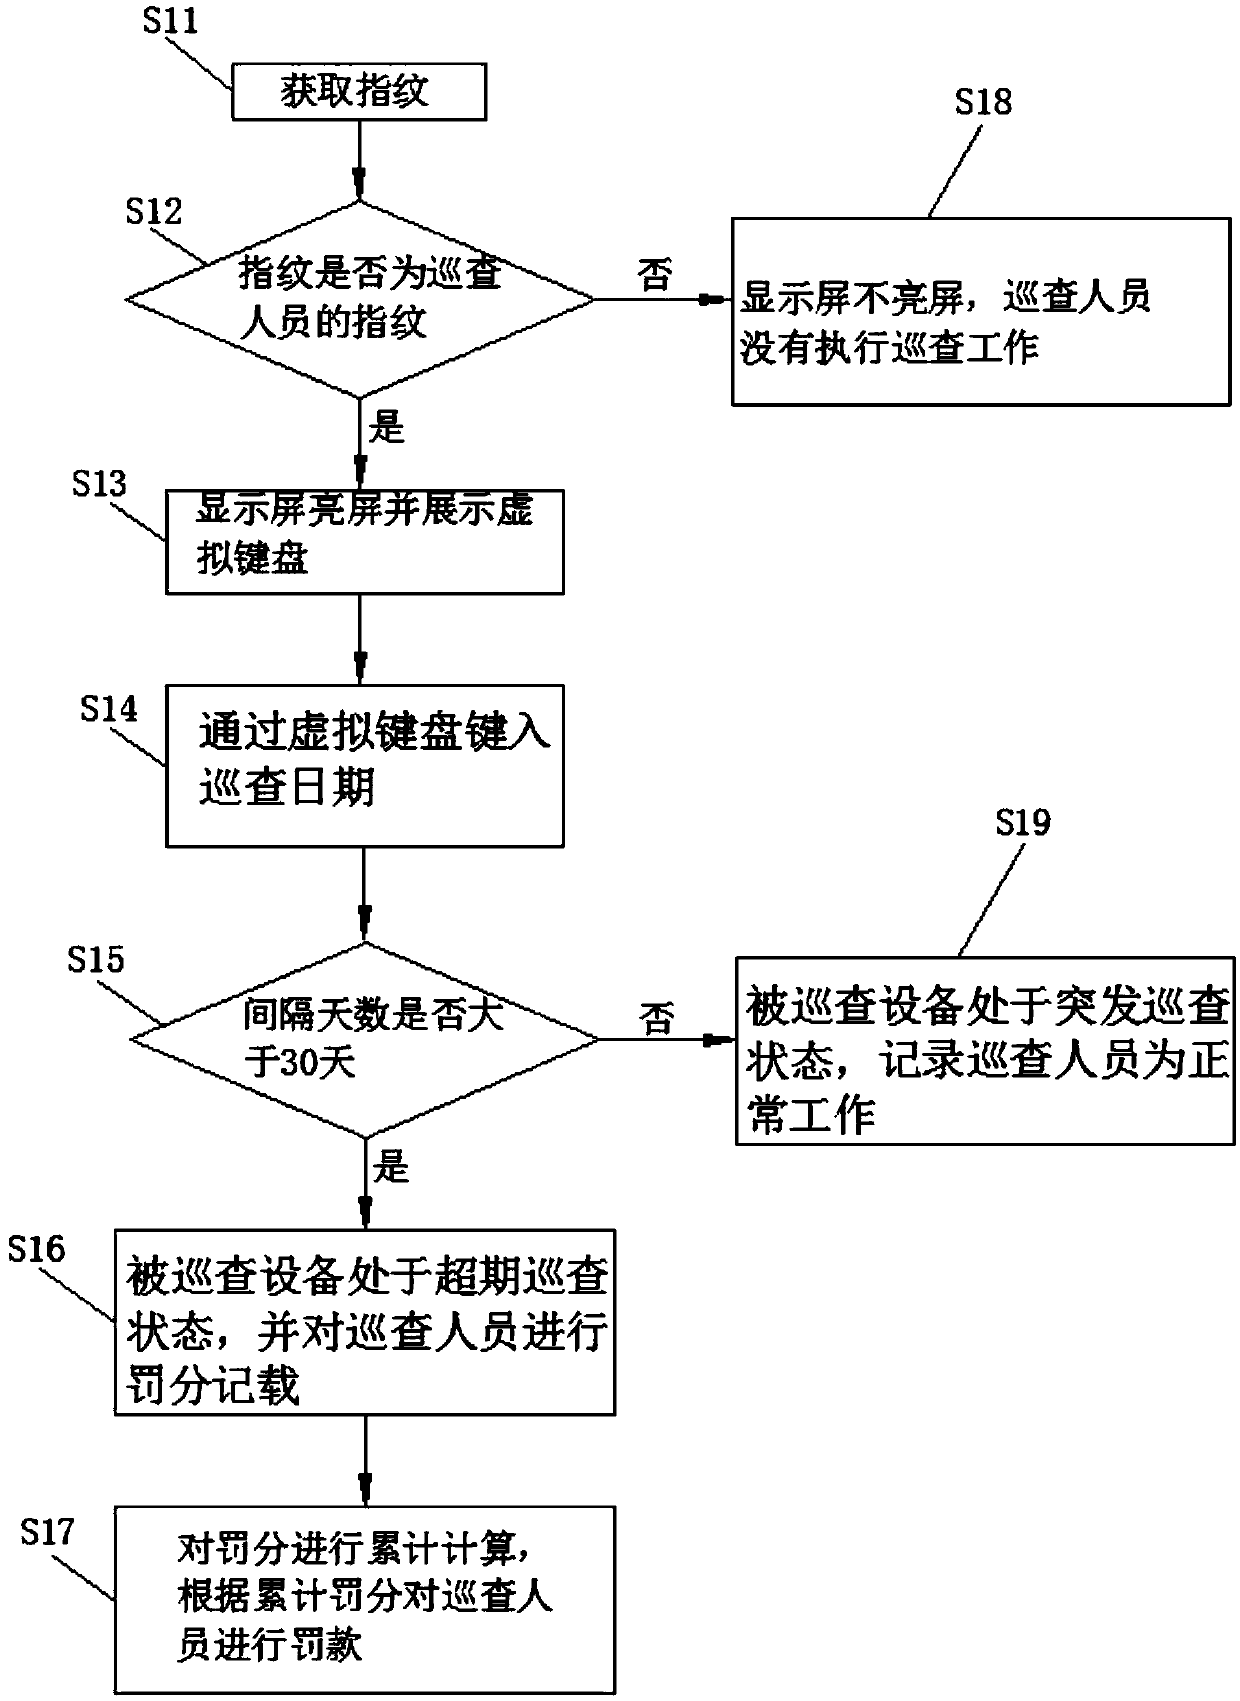 Property alarm center management method and management system thereof, and comprehensive property management system